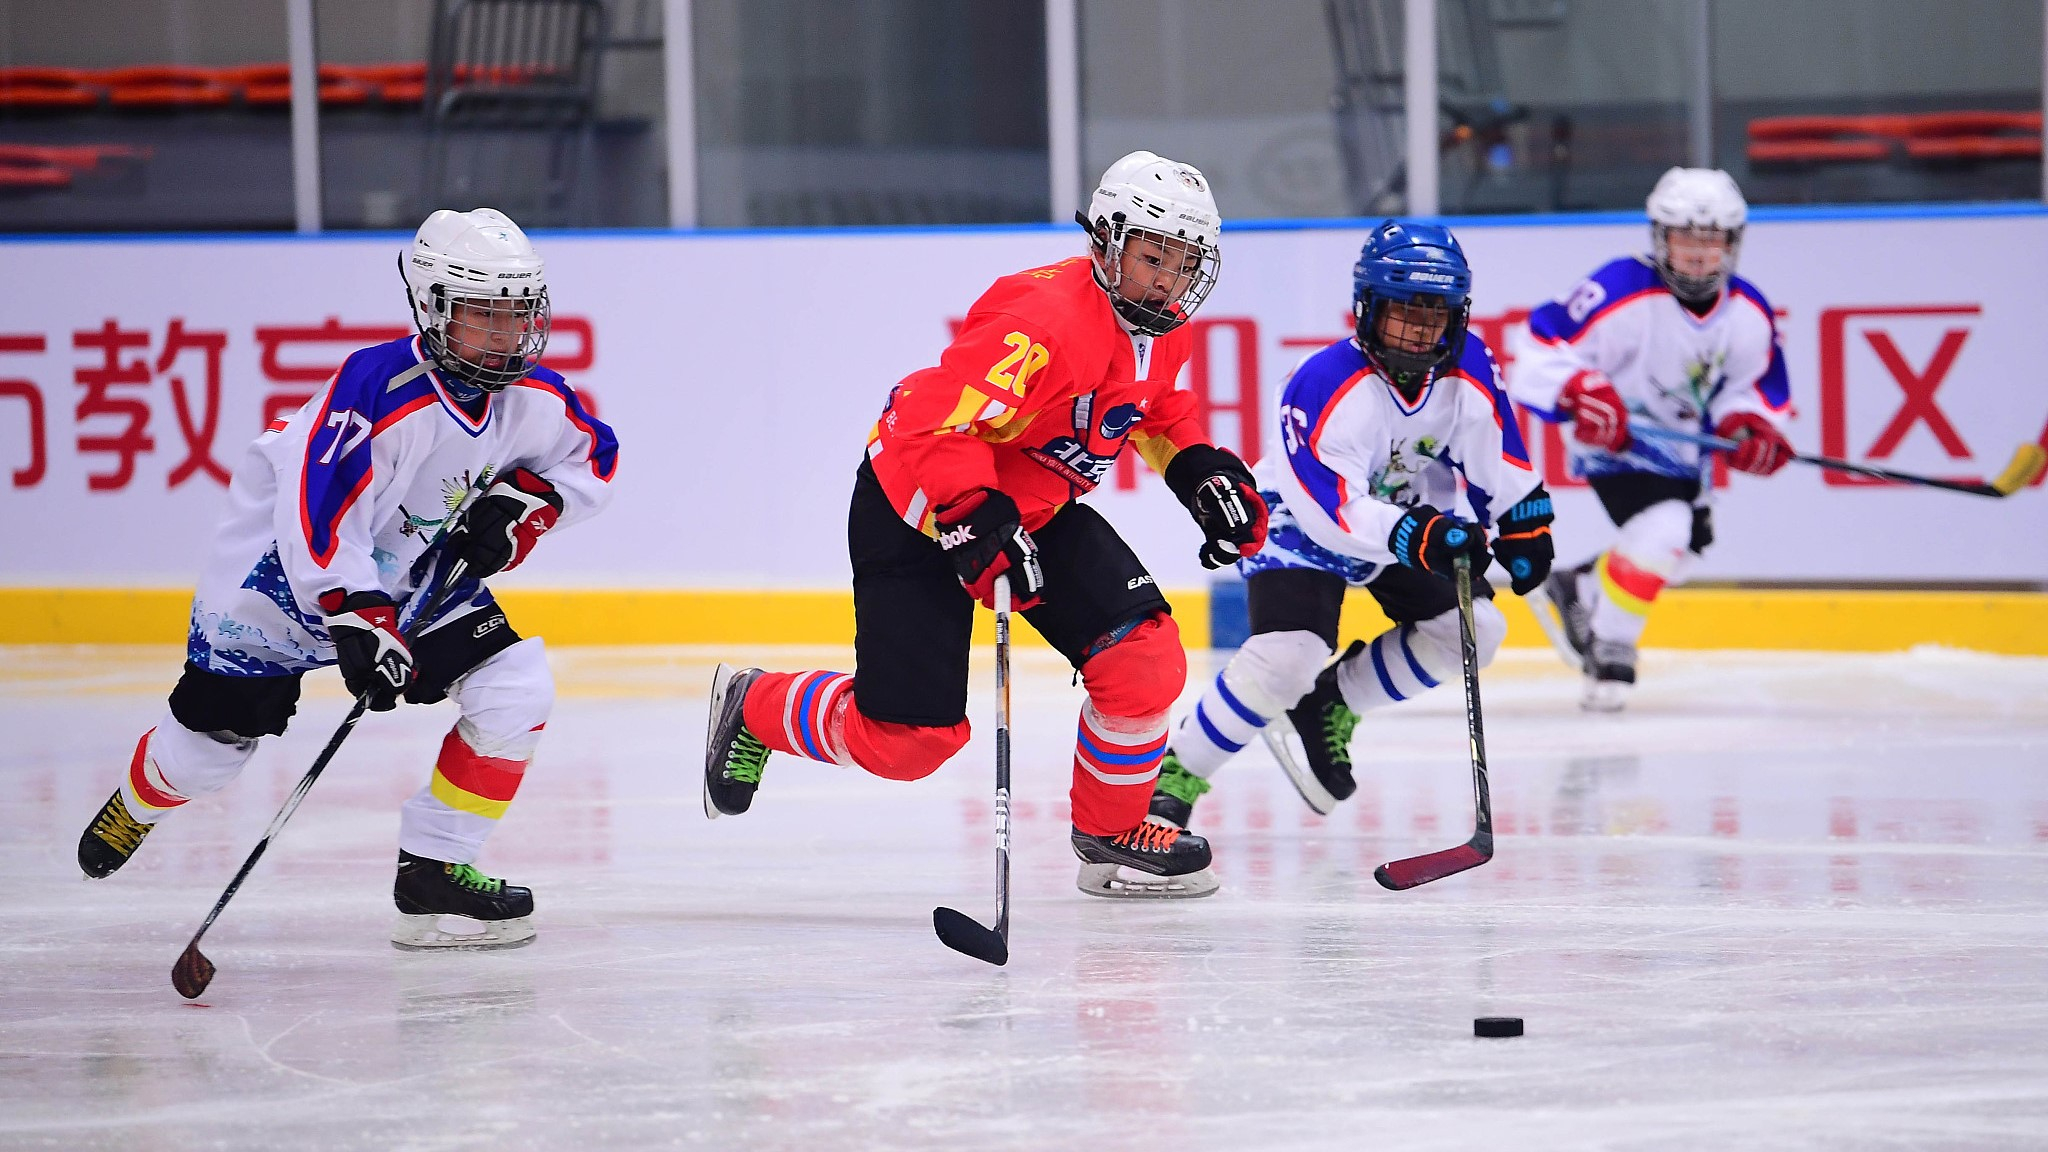 IIHF asks China to improve ice hockey to justify 2022 qualification CGTN